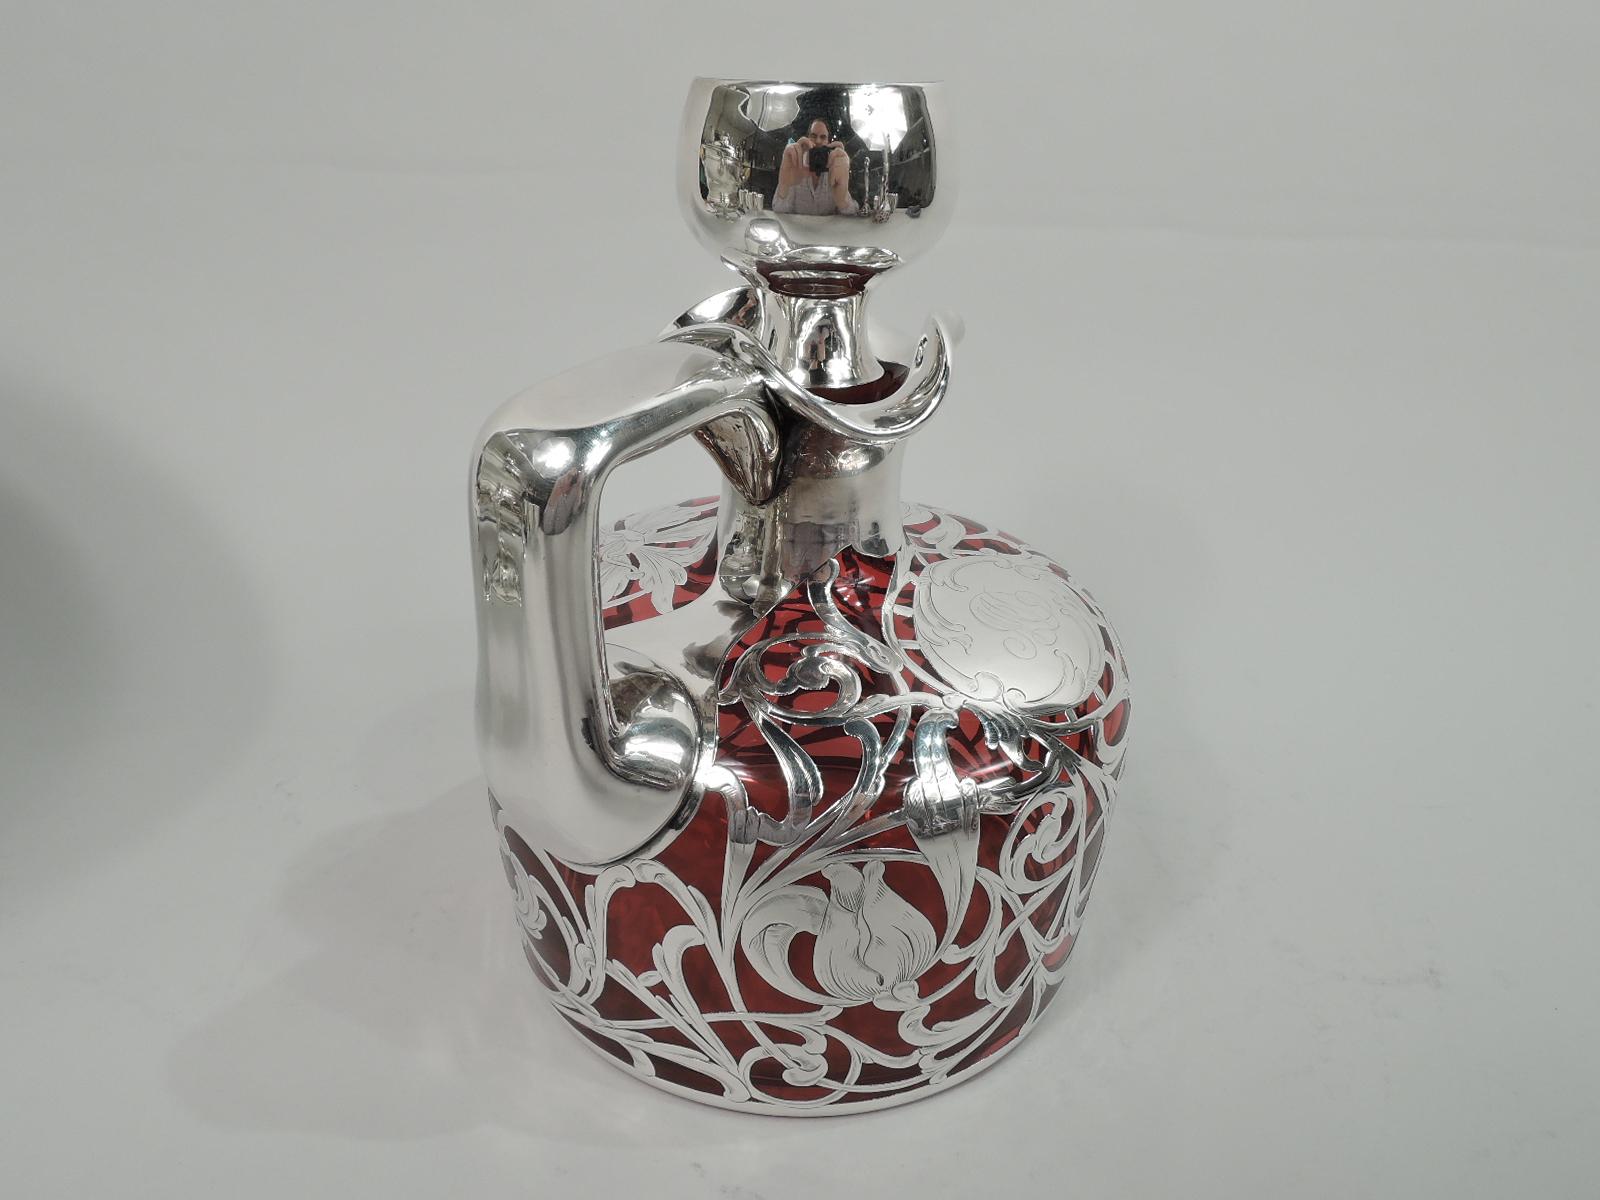 Turn-of-the-century American Art Nouveau glass jug decanter with engraved silver overlay. Drum form with curved shoulder. Neck and trefoil mouth in silver collar as is bracket handle. Flat-topped stopper same. Entwined and scrolling tendrils with